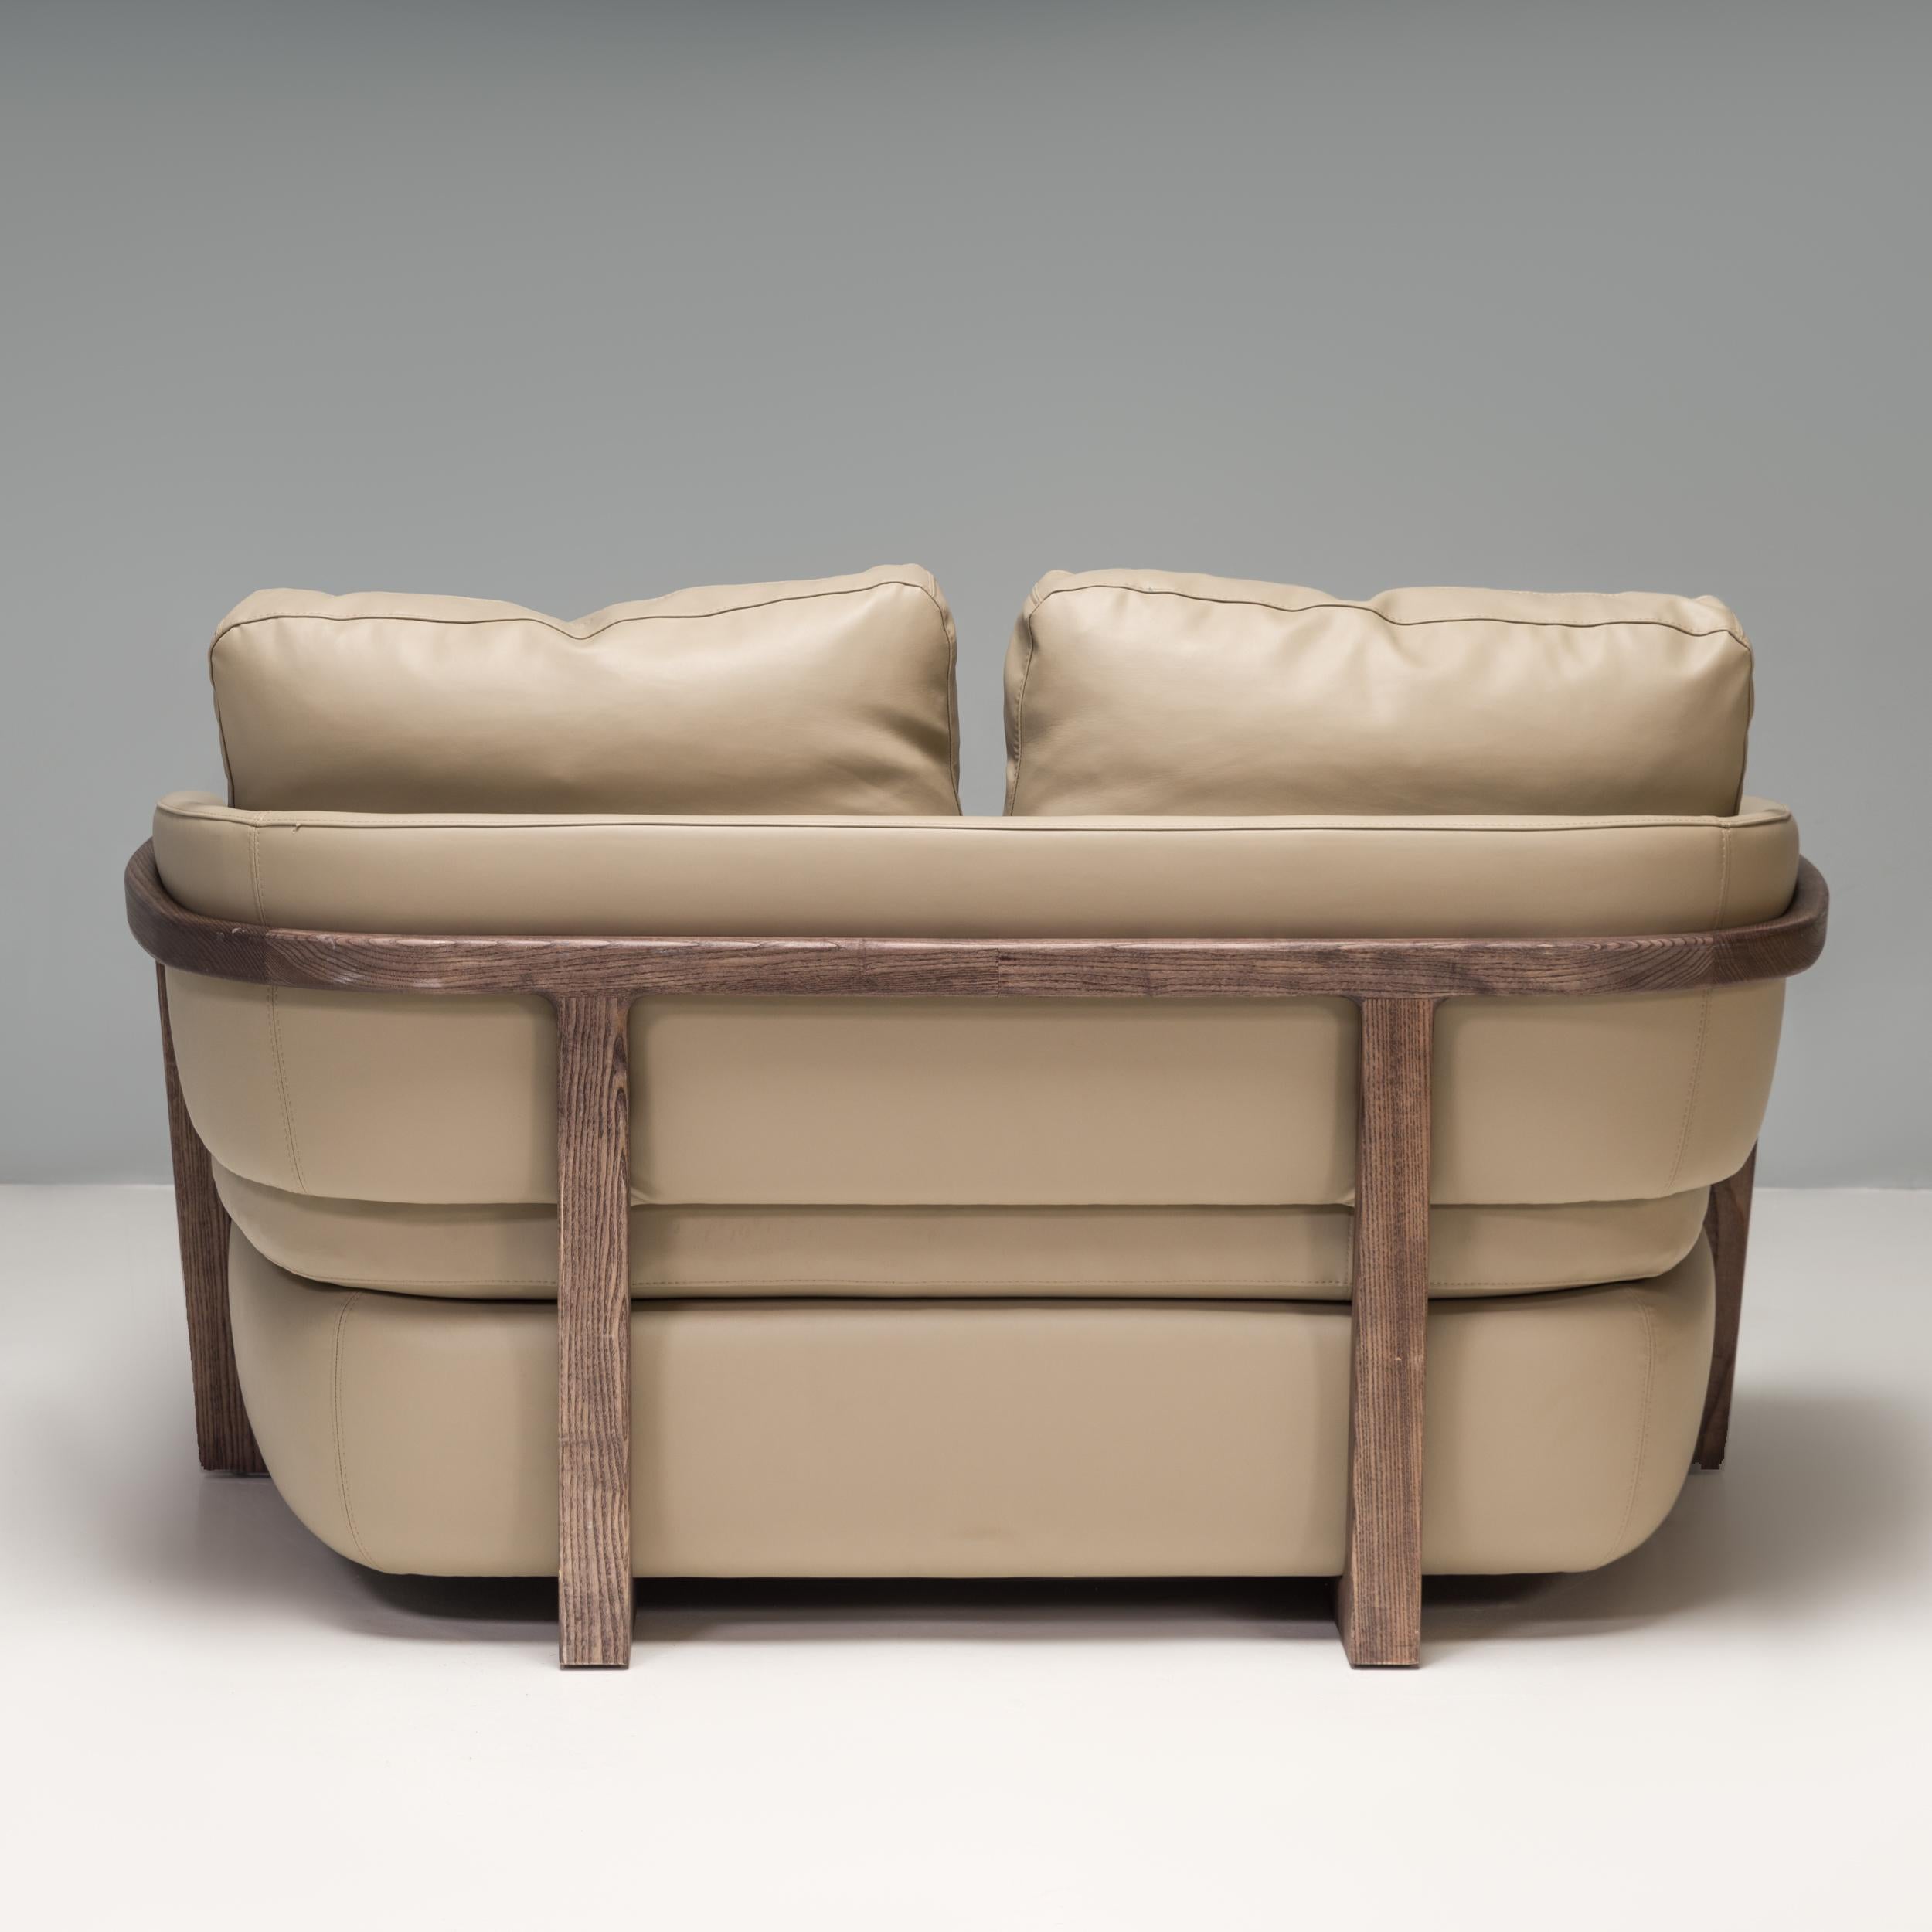 Emmanuel Gallina for Porada Beige Leather Arena 147 Loveseat Sofa In Good Condition For Sale In London, GB